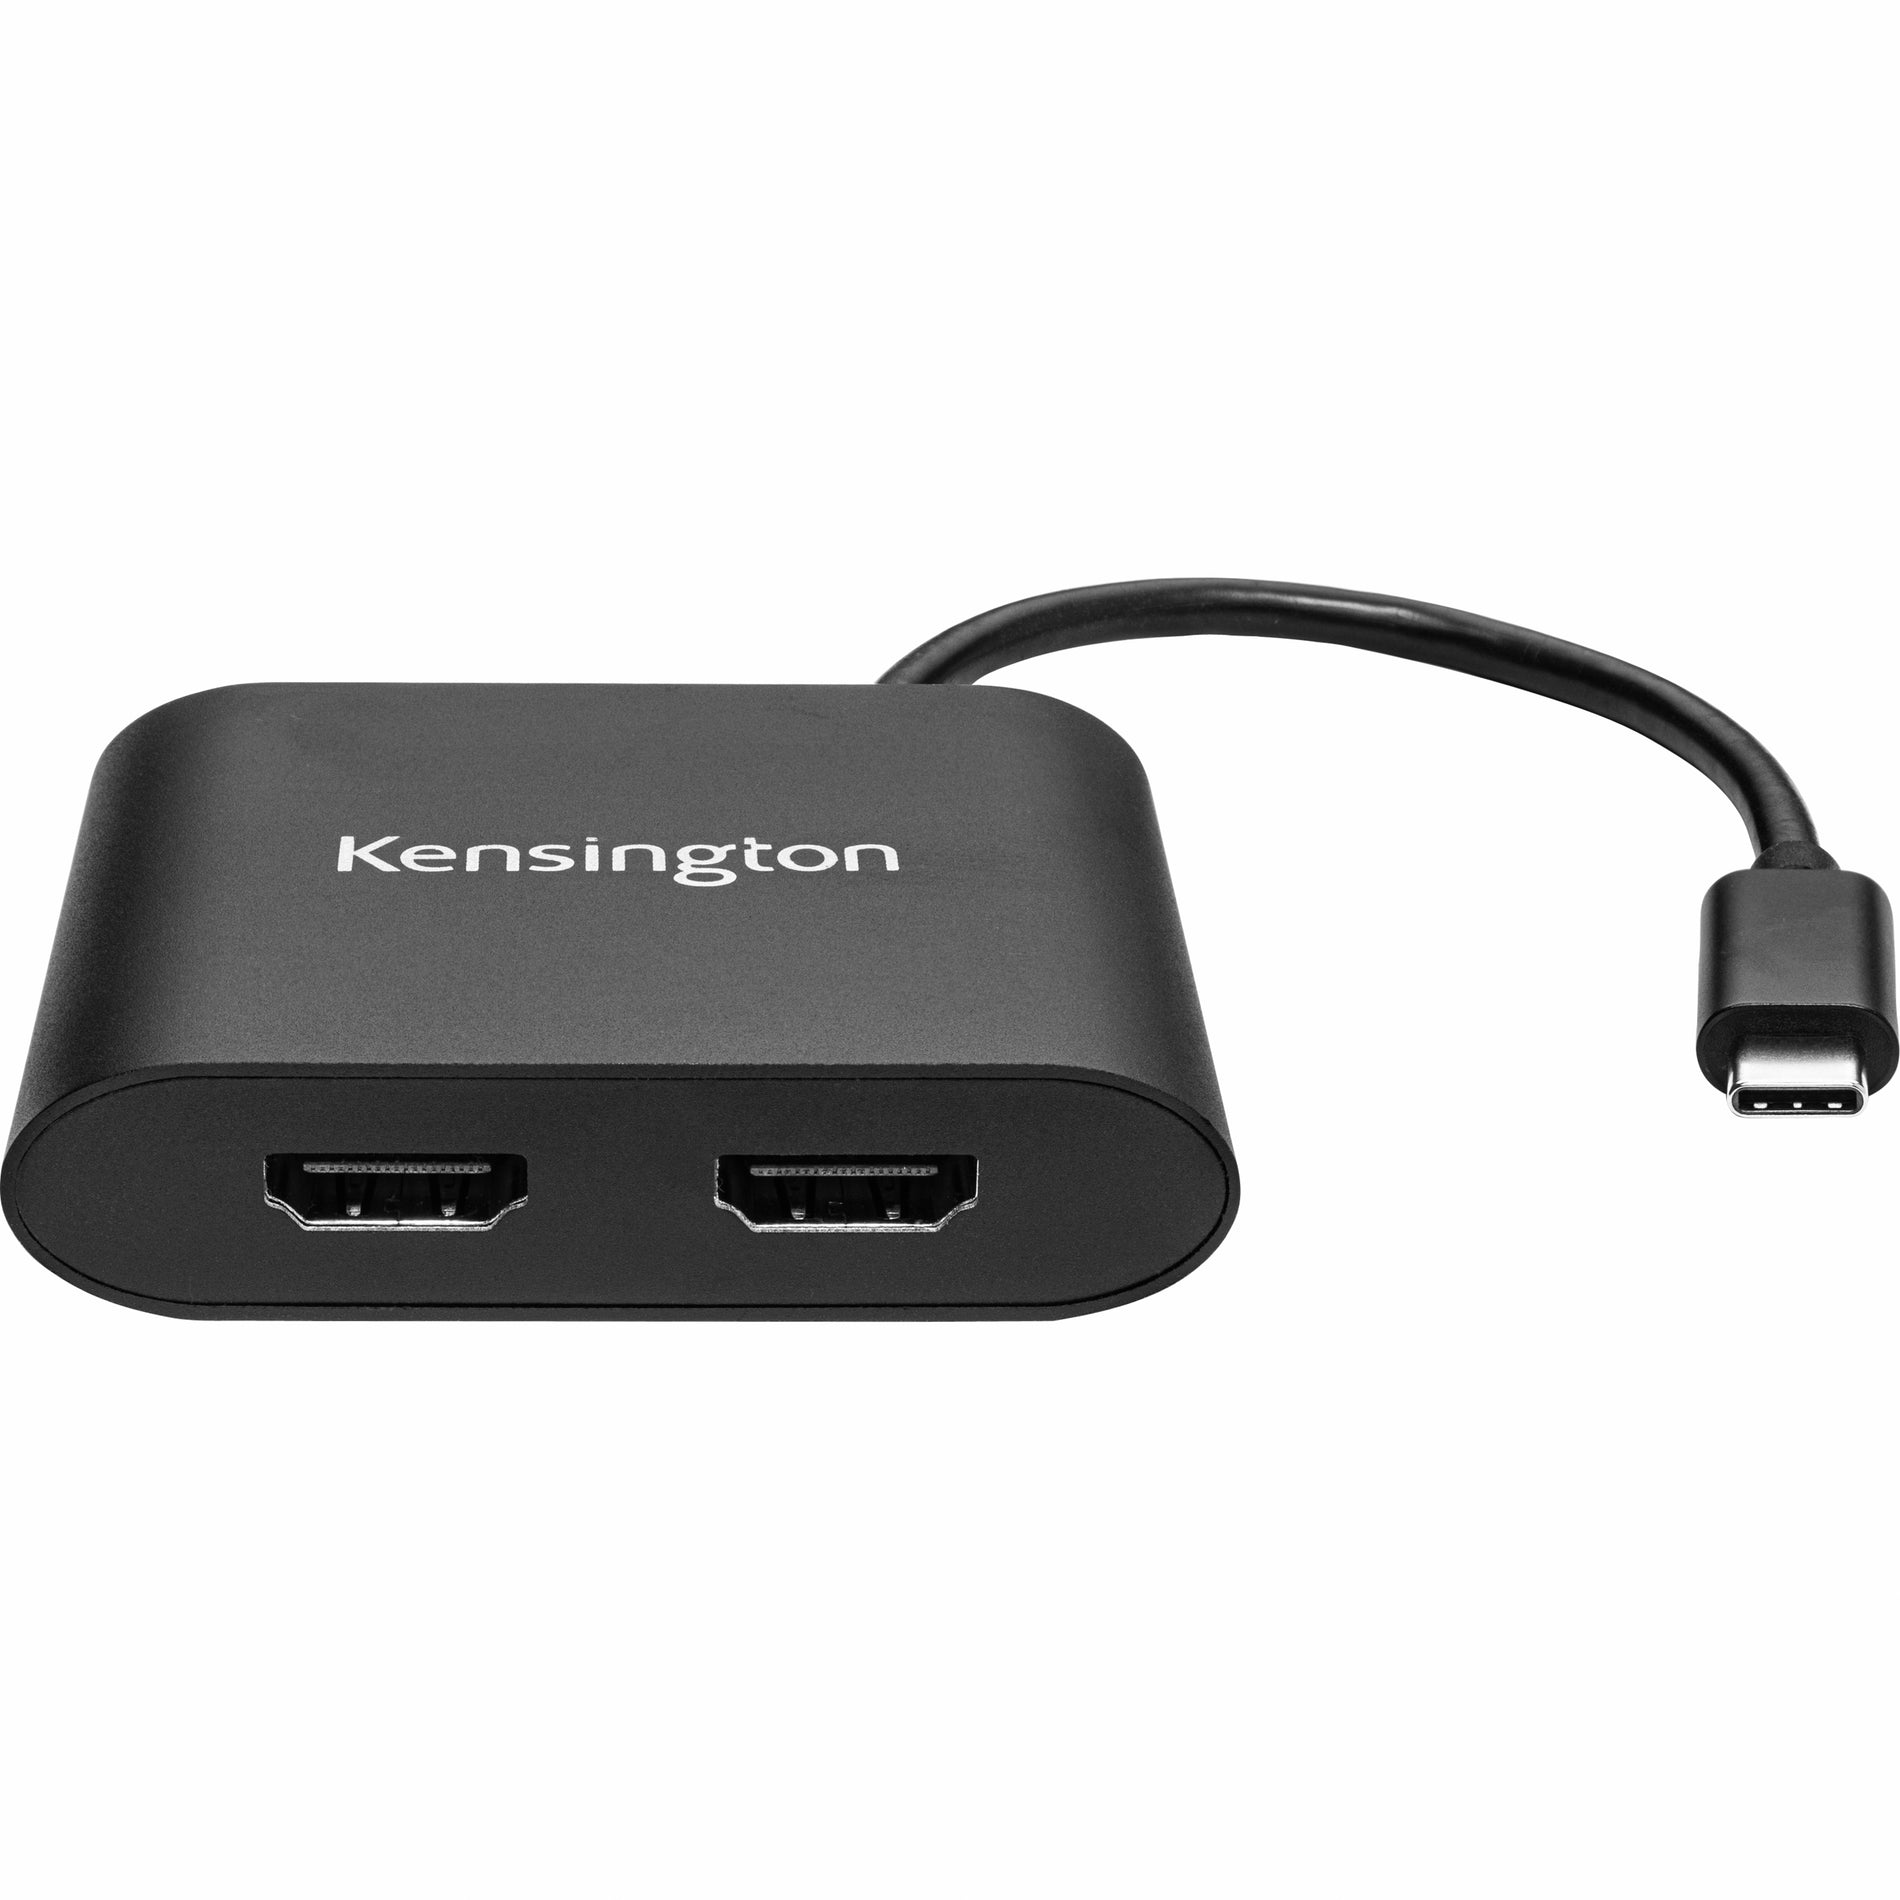 Kensington K38286WW USB-C to Dual HDMI 1.4 Video Adapter, Plug and Play, 3840 x 2160 Resolution Supported